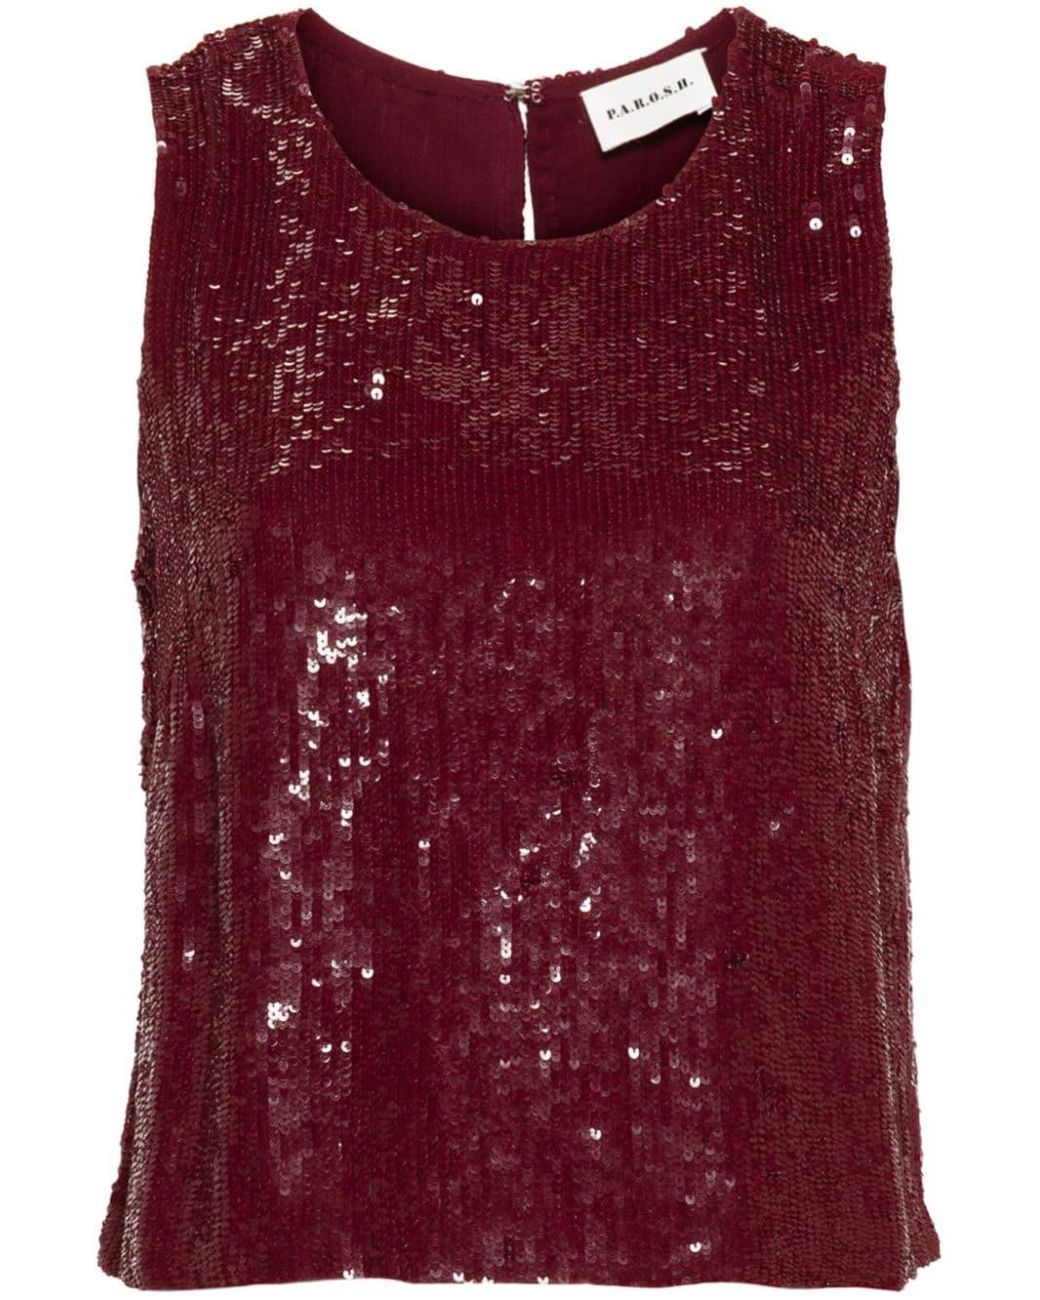 P.A.R.O.S.H. Sequin Sleeveless Top in Red | Lyst UK